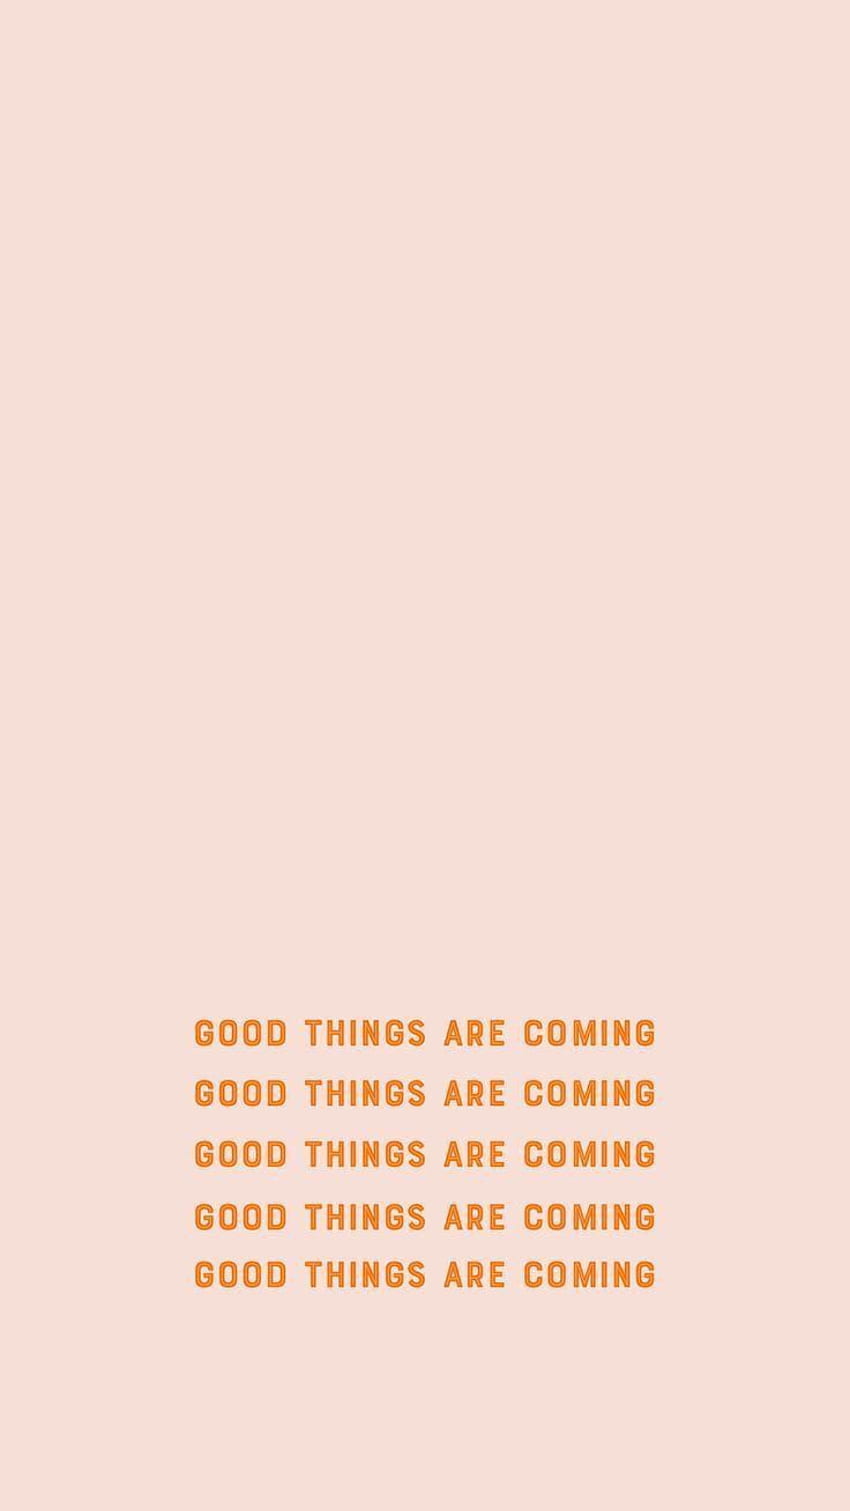 Just know that good things are coming and self care is super HD phone wallpaper